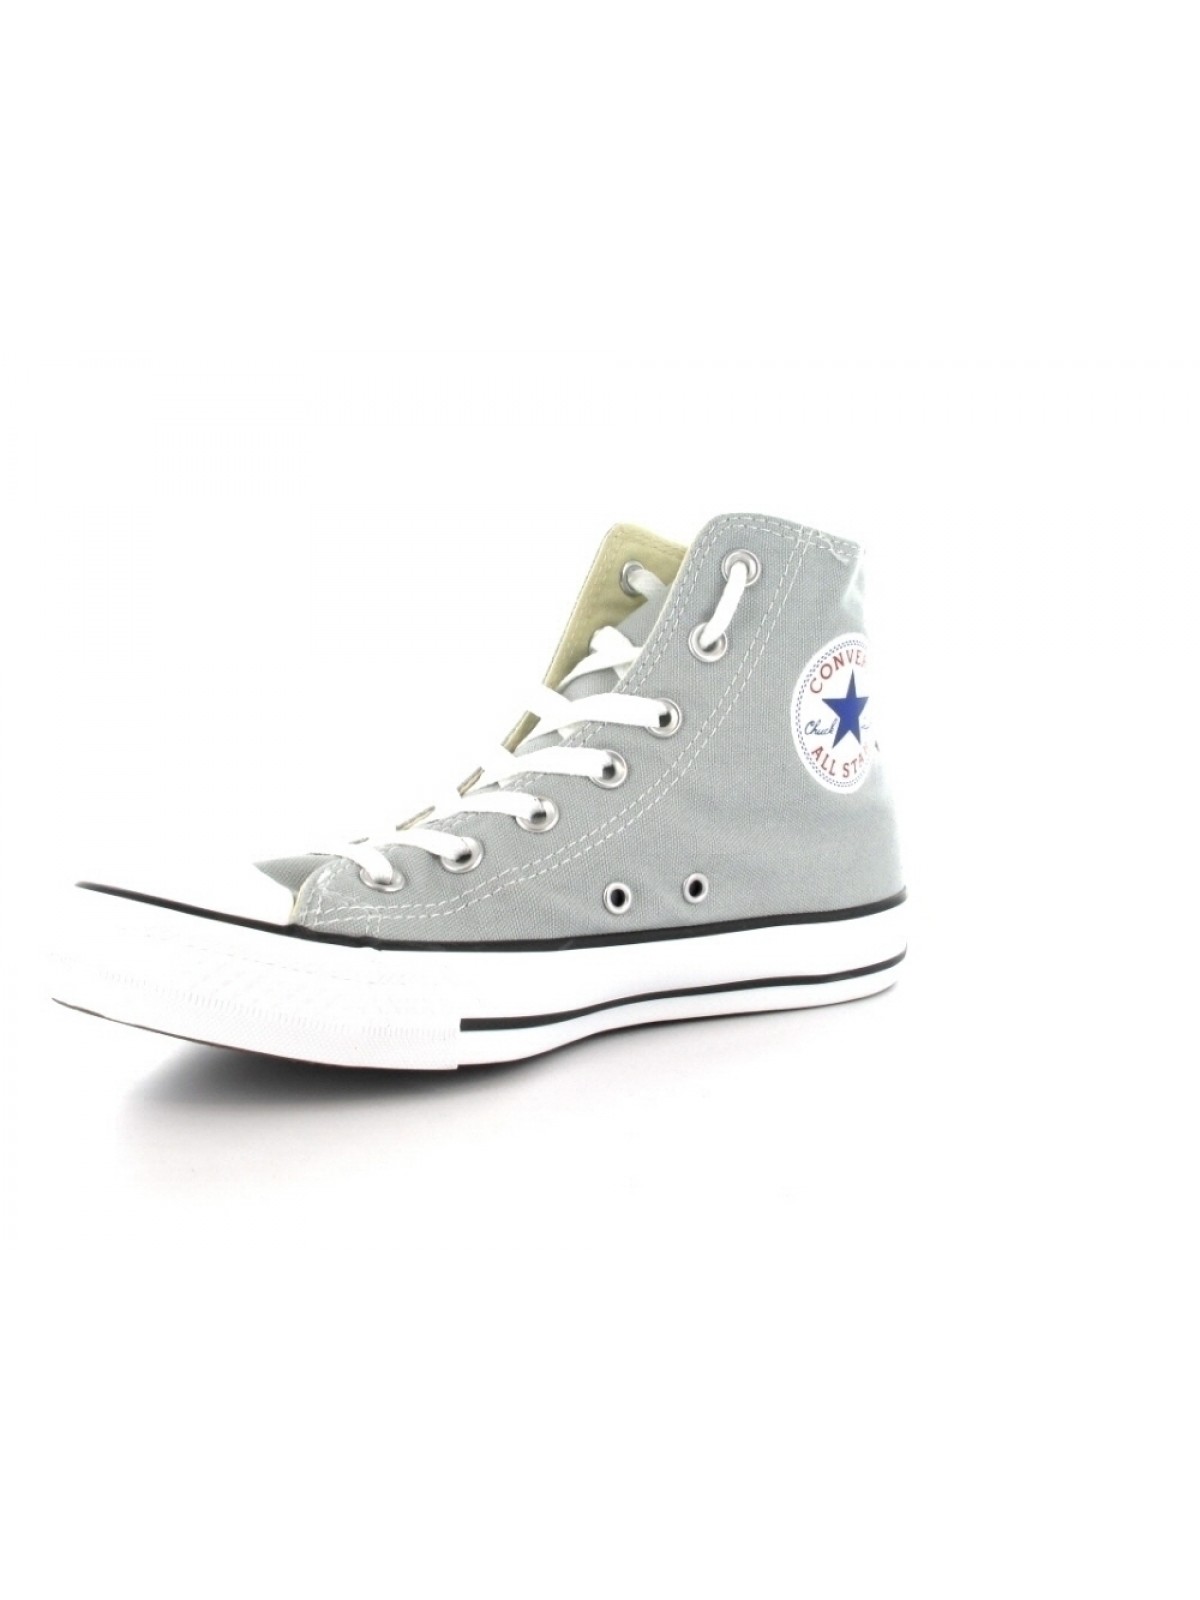 Converse Chuck Taylor all star toile gris mirage